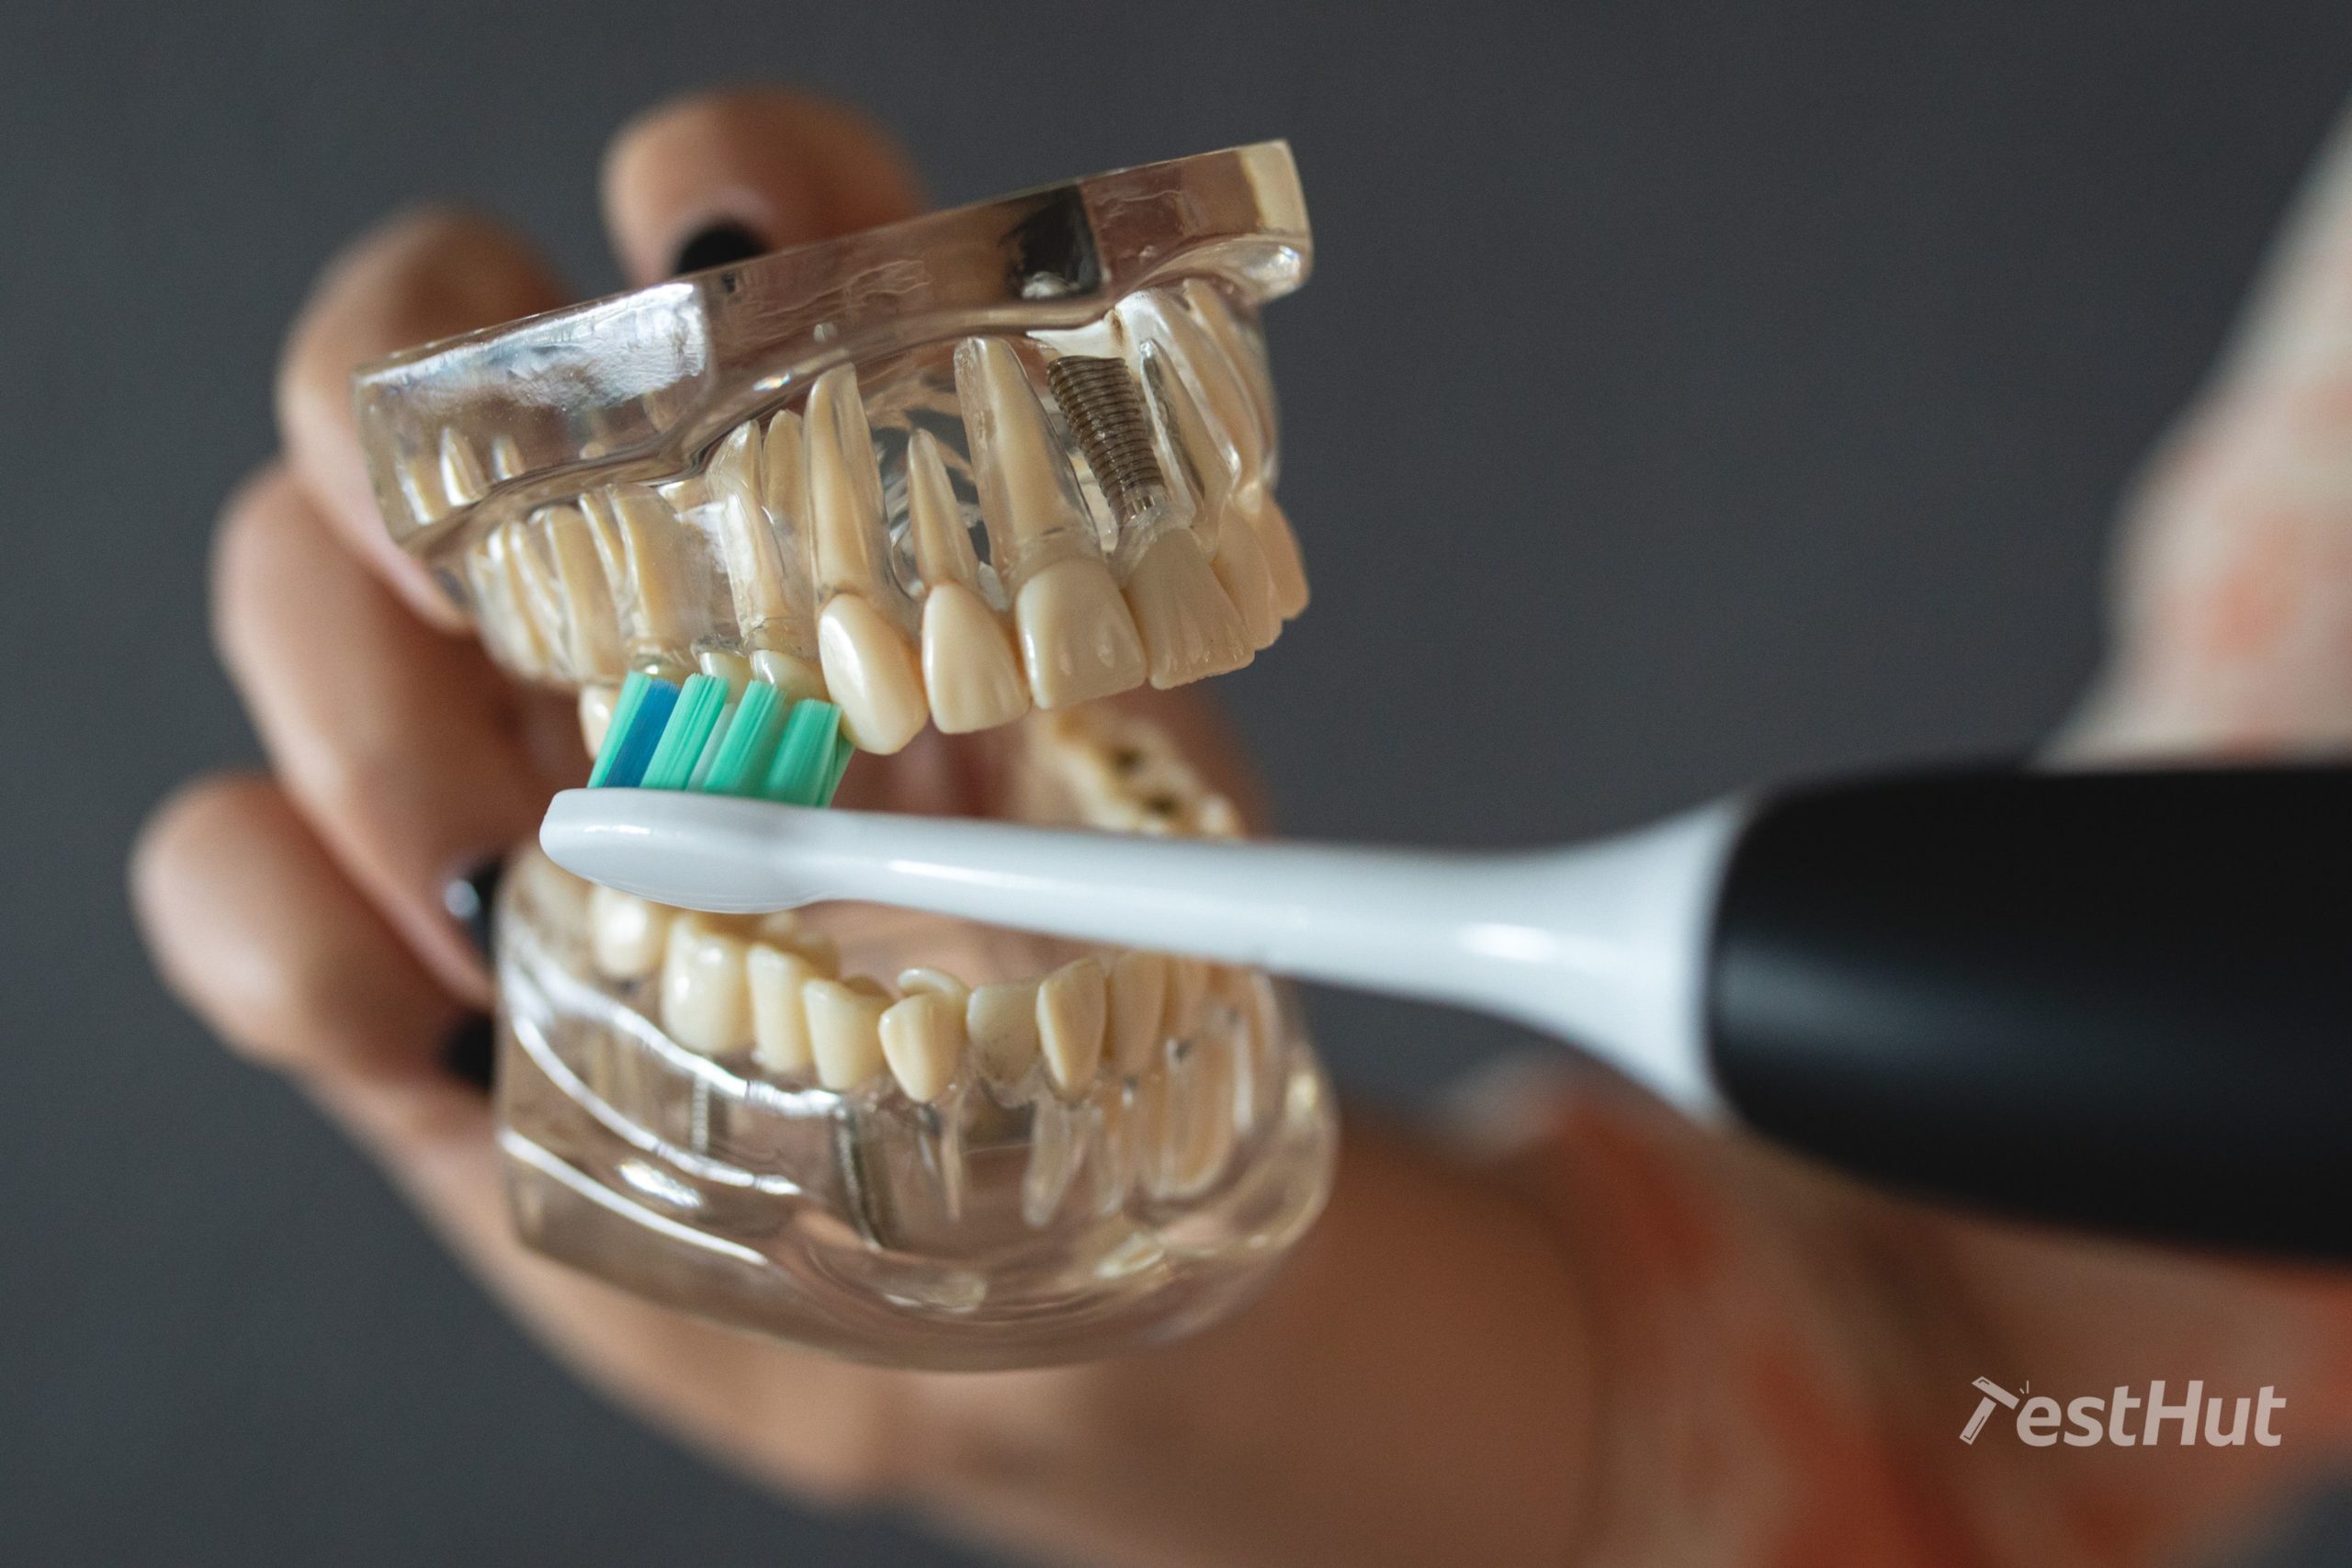 https://www.testhut.com/uk/wp-content/uploads/sites/9/2021/11/Cleaning_teeth_featured-1-scaled.jpg